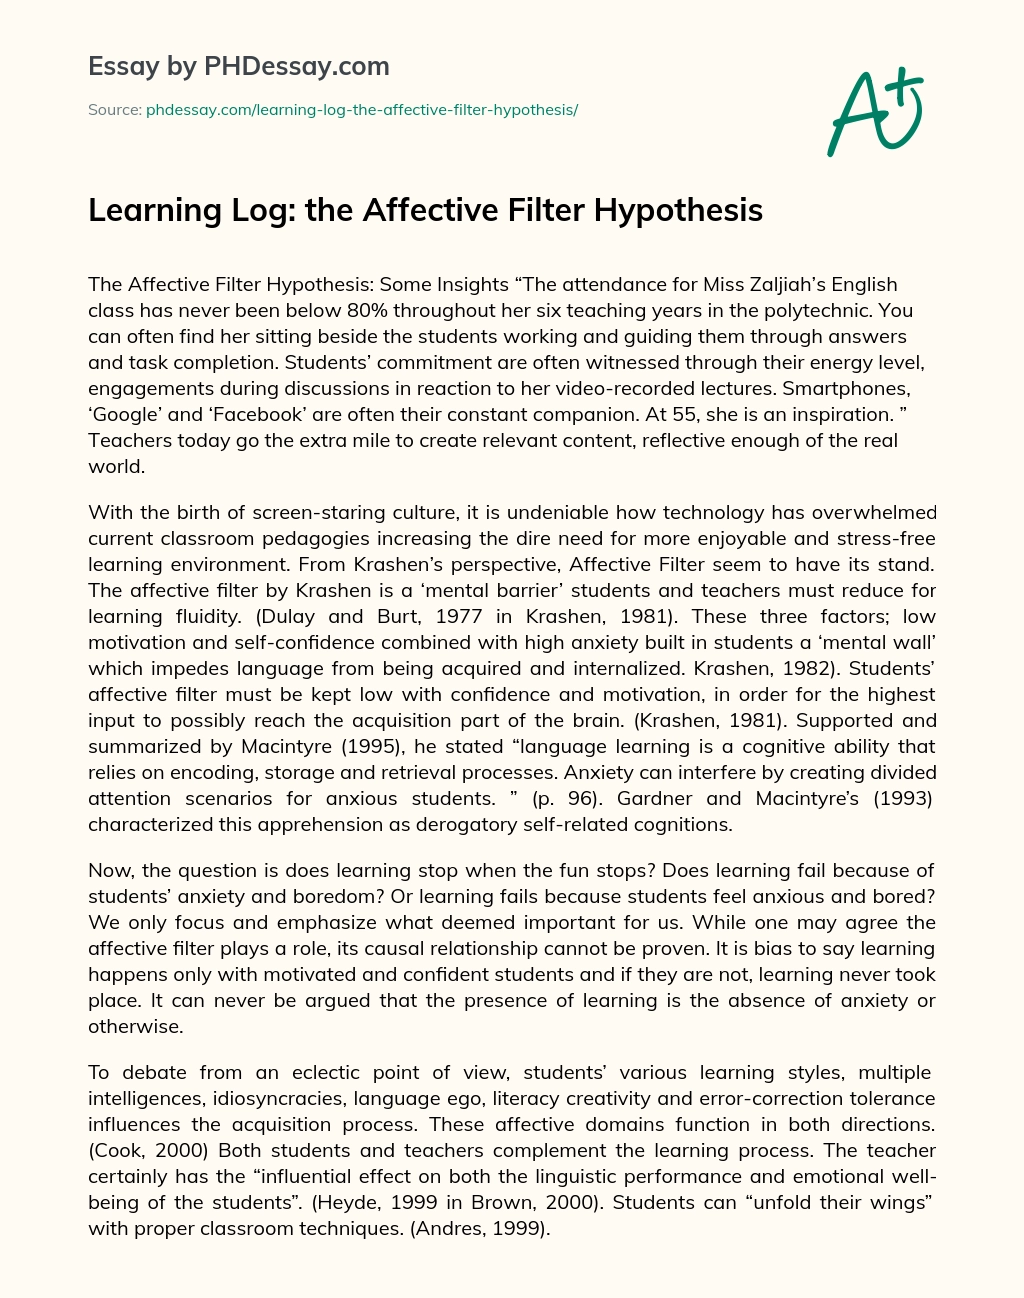 Learning Log: the Affective Filter Hypothesis essay